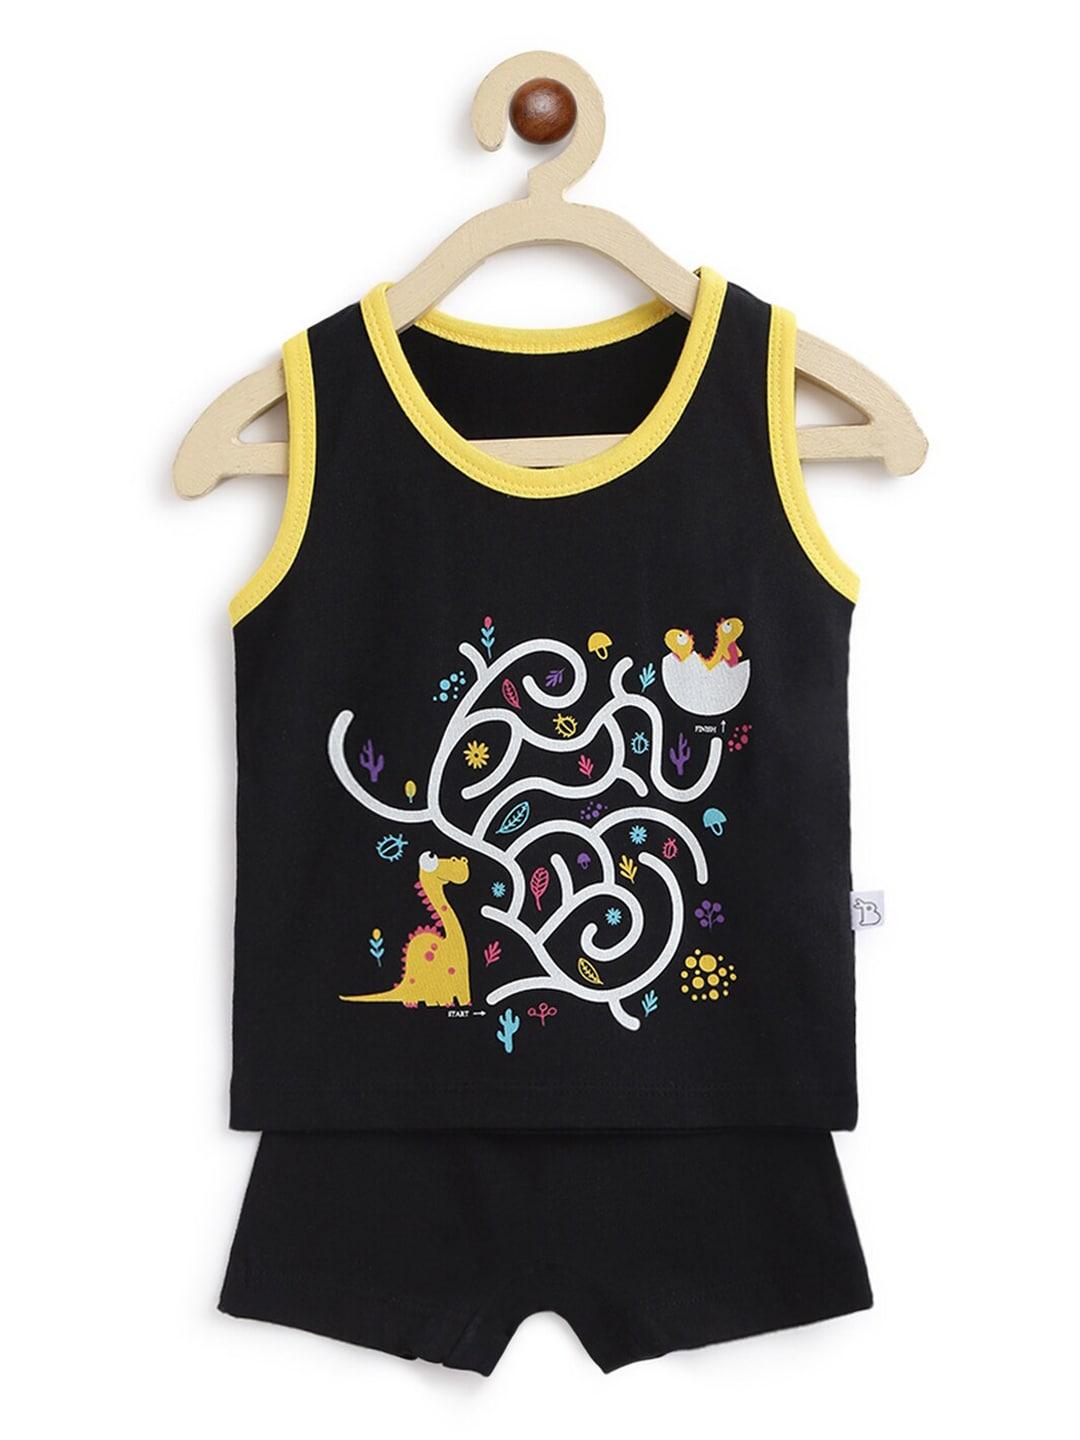 superbottoms-unisex-kids-black-&-yellow-printed-sustainable-t-shirt-with-shorts